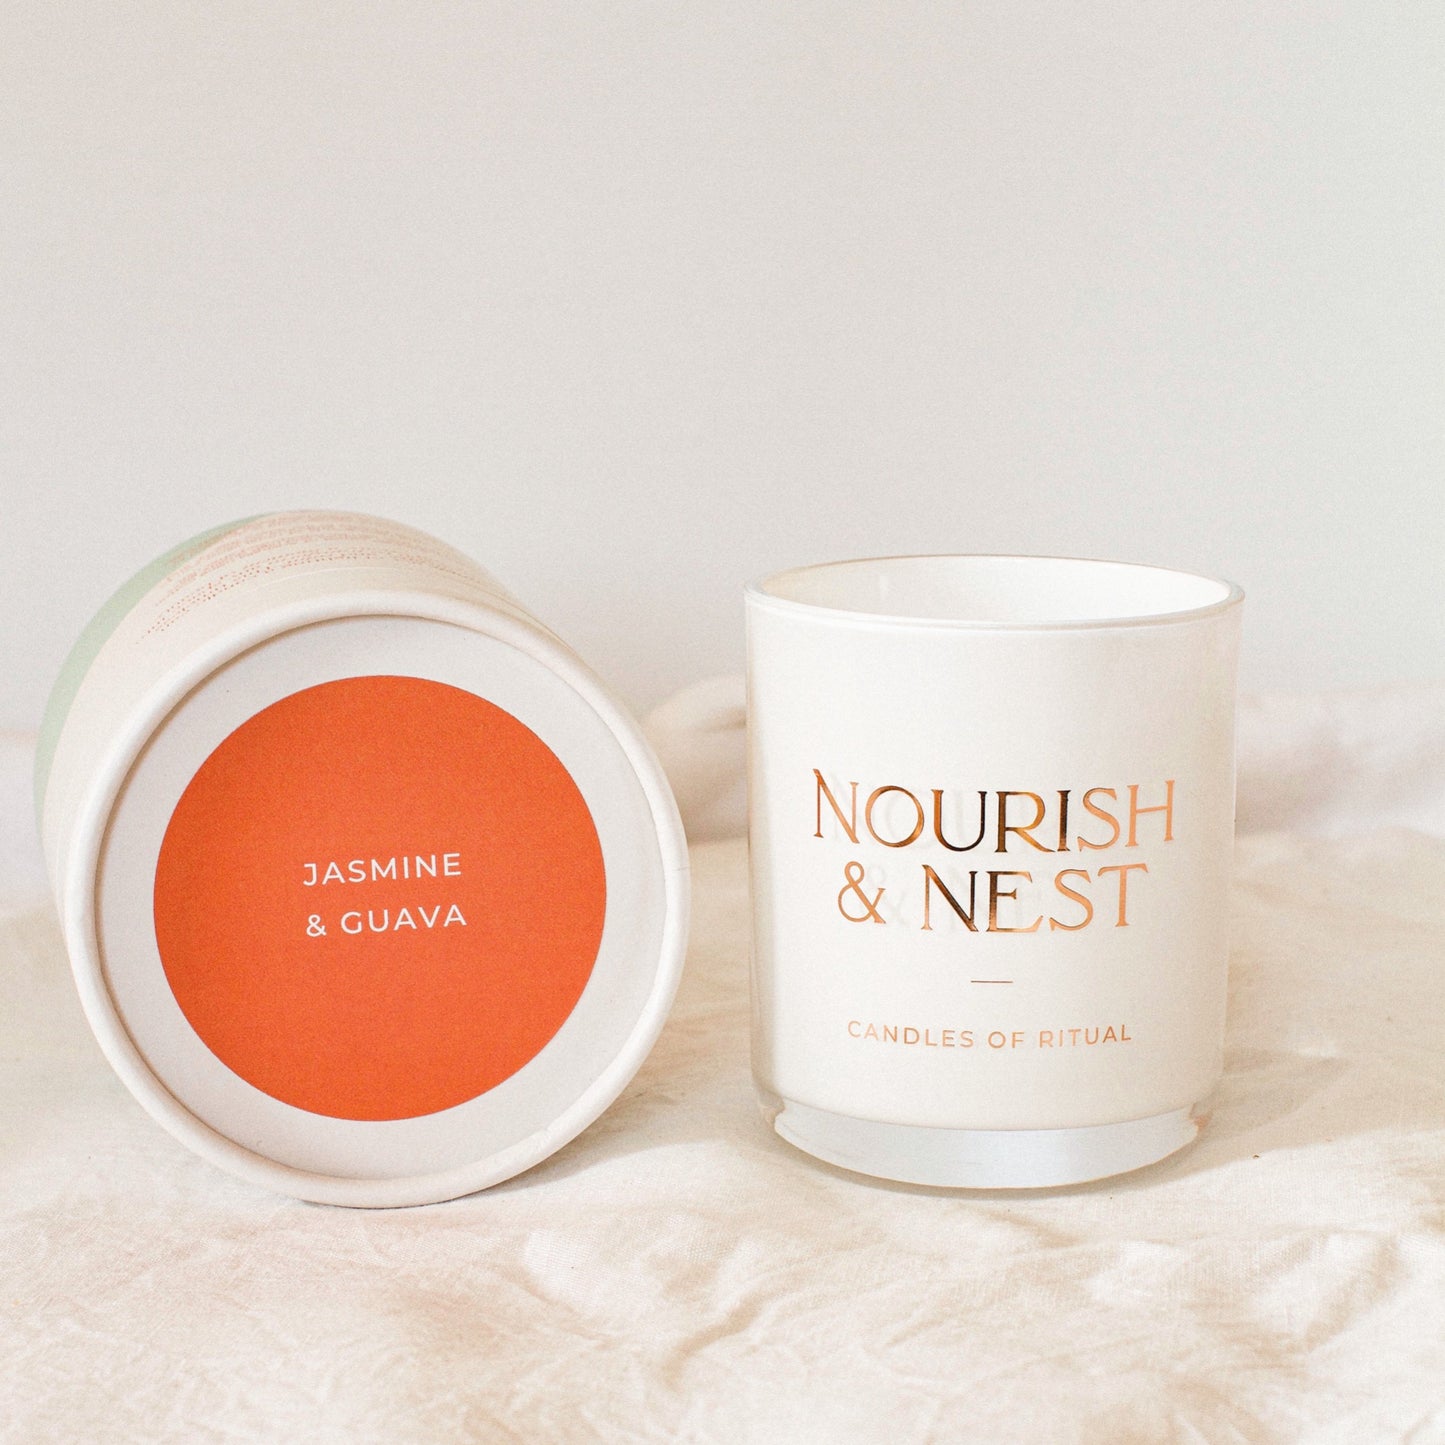 'Jasmine & Guava' - coconut & soy candle